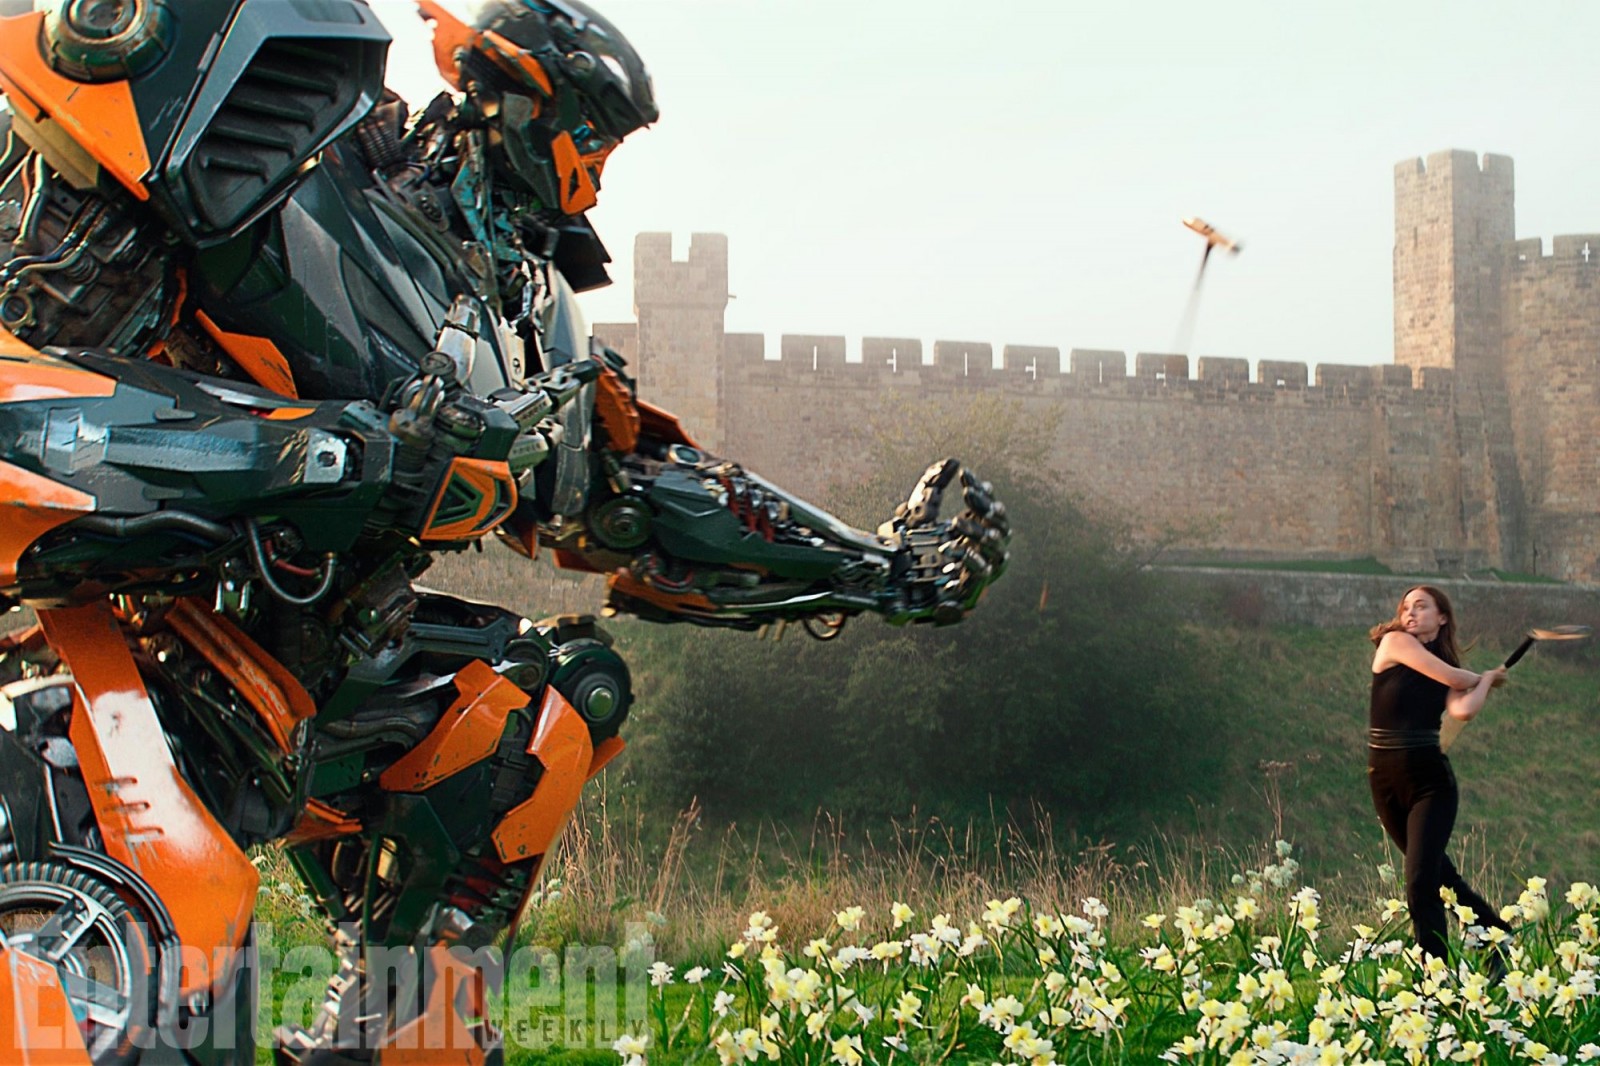 Transformers News: More Images Of Hot Rod from Transformers: The Last Knight